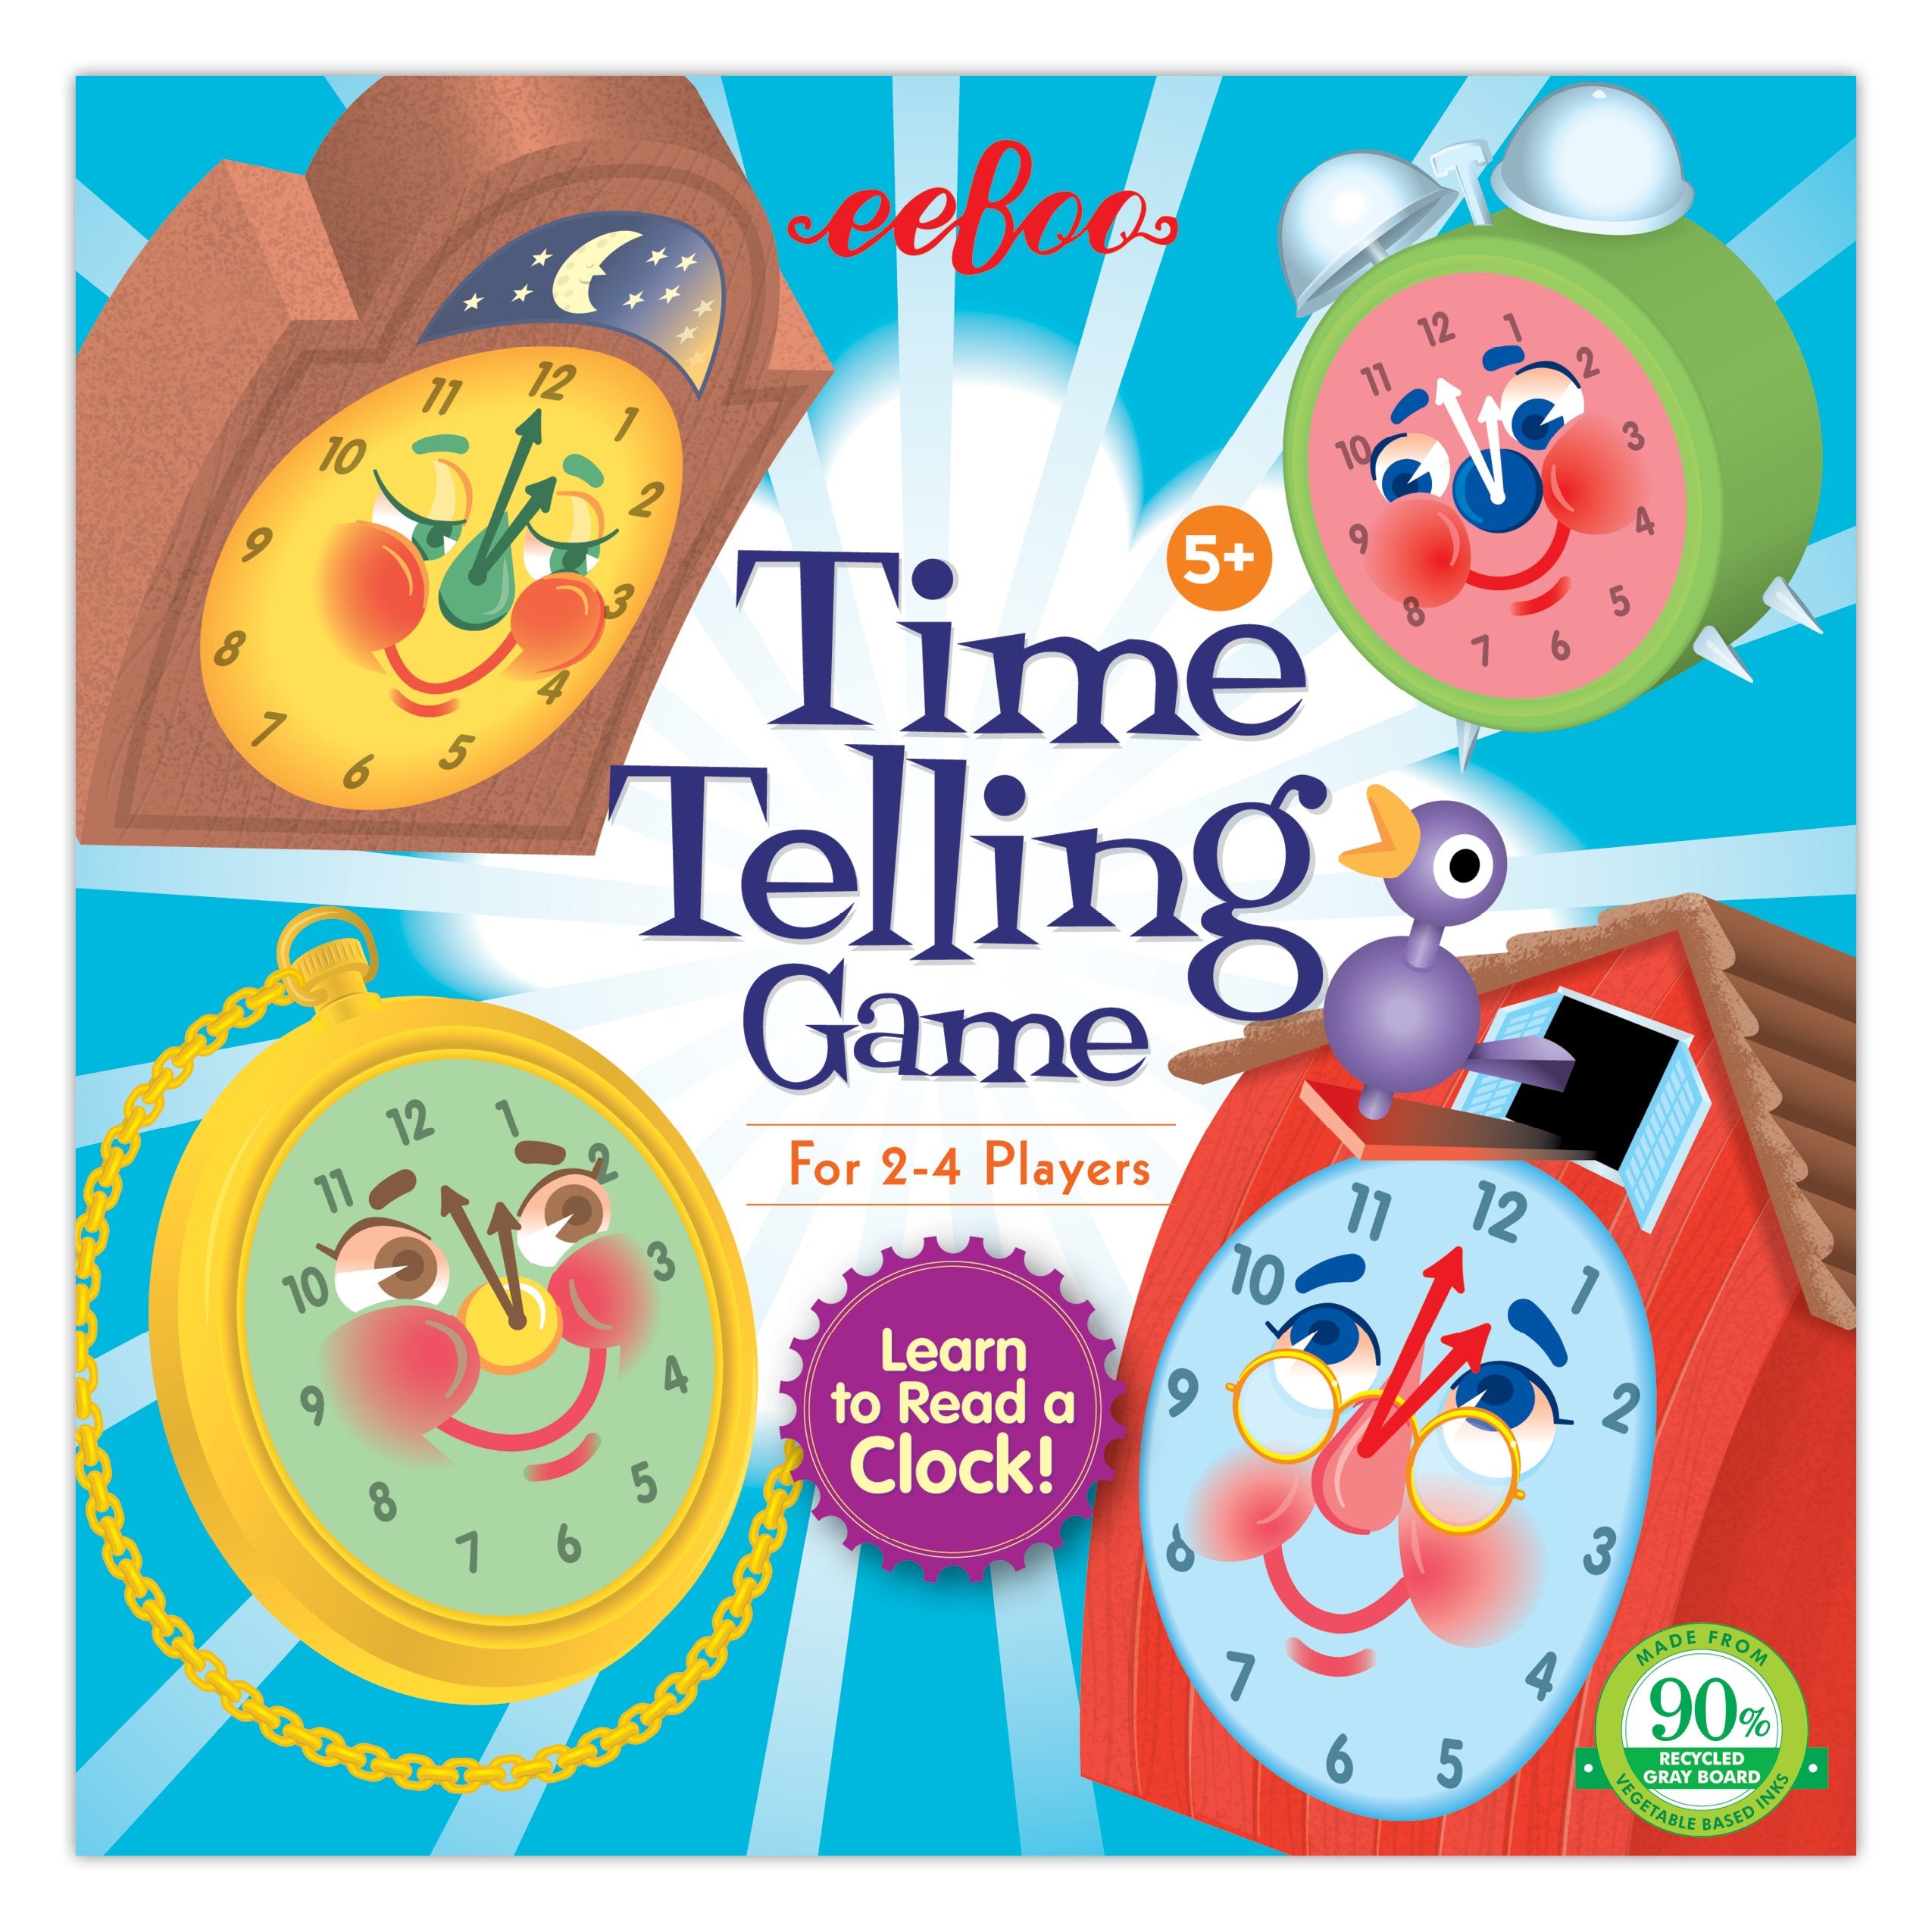 Time Telling Game Kaboodles Toy Store - Victoria